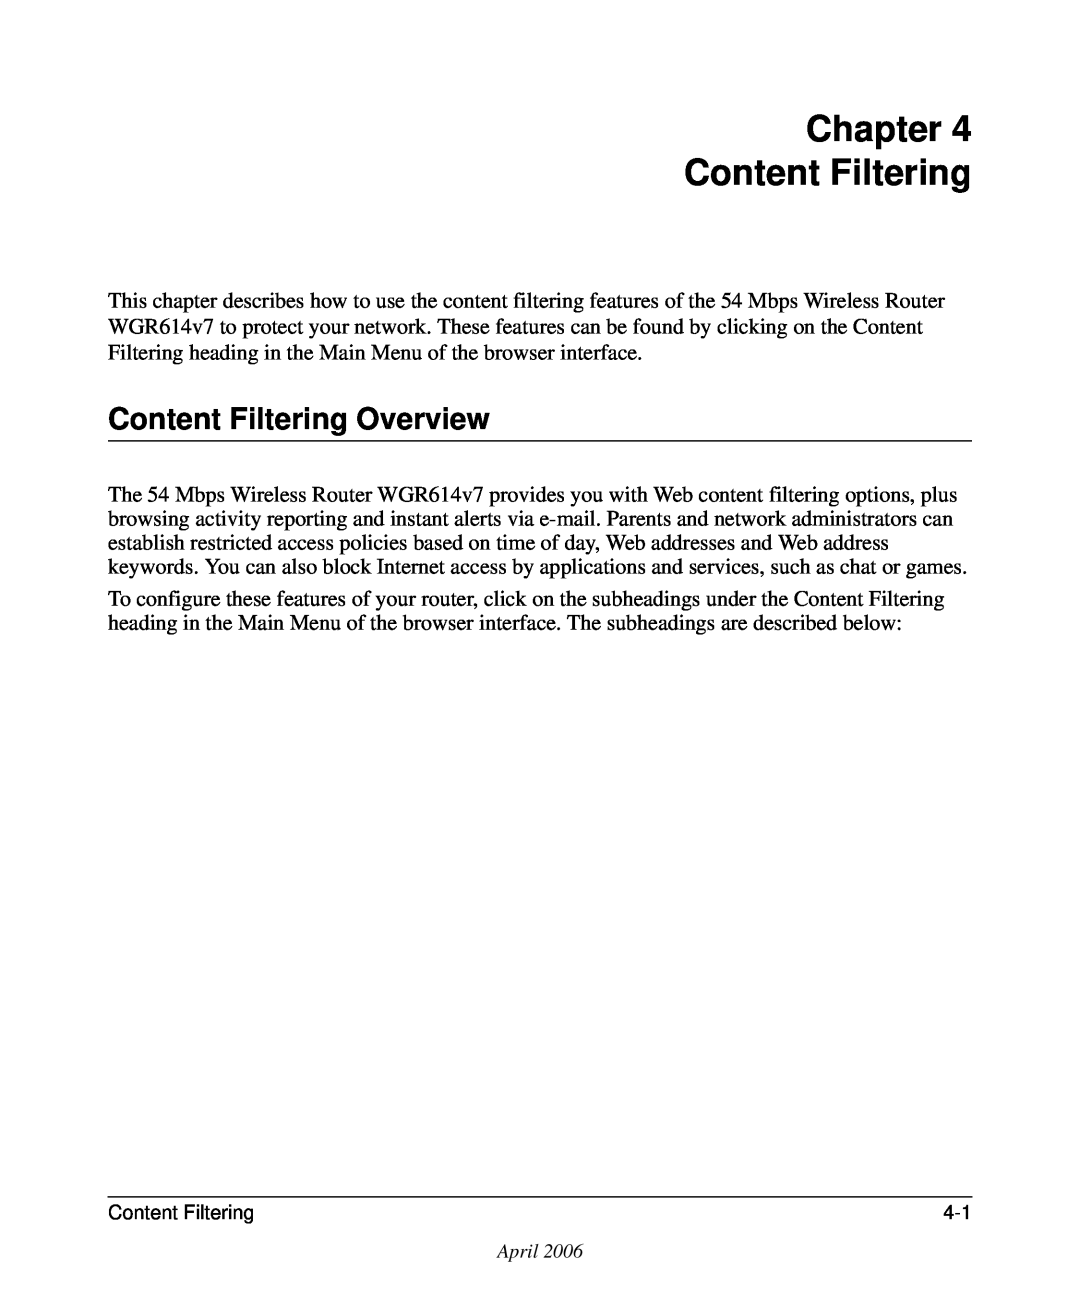 NETGEAR WGR614v7 manual Chapter Content Filtering, Content Filtering Overview 